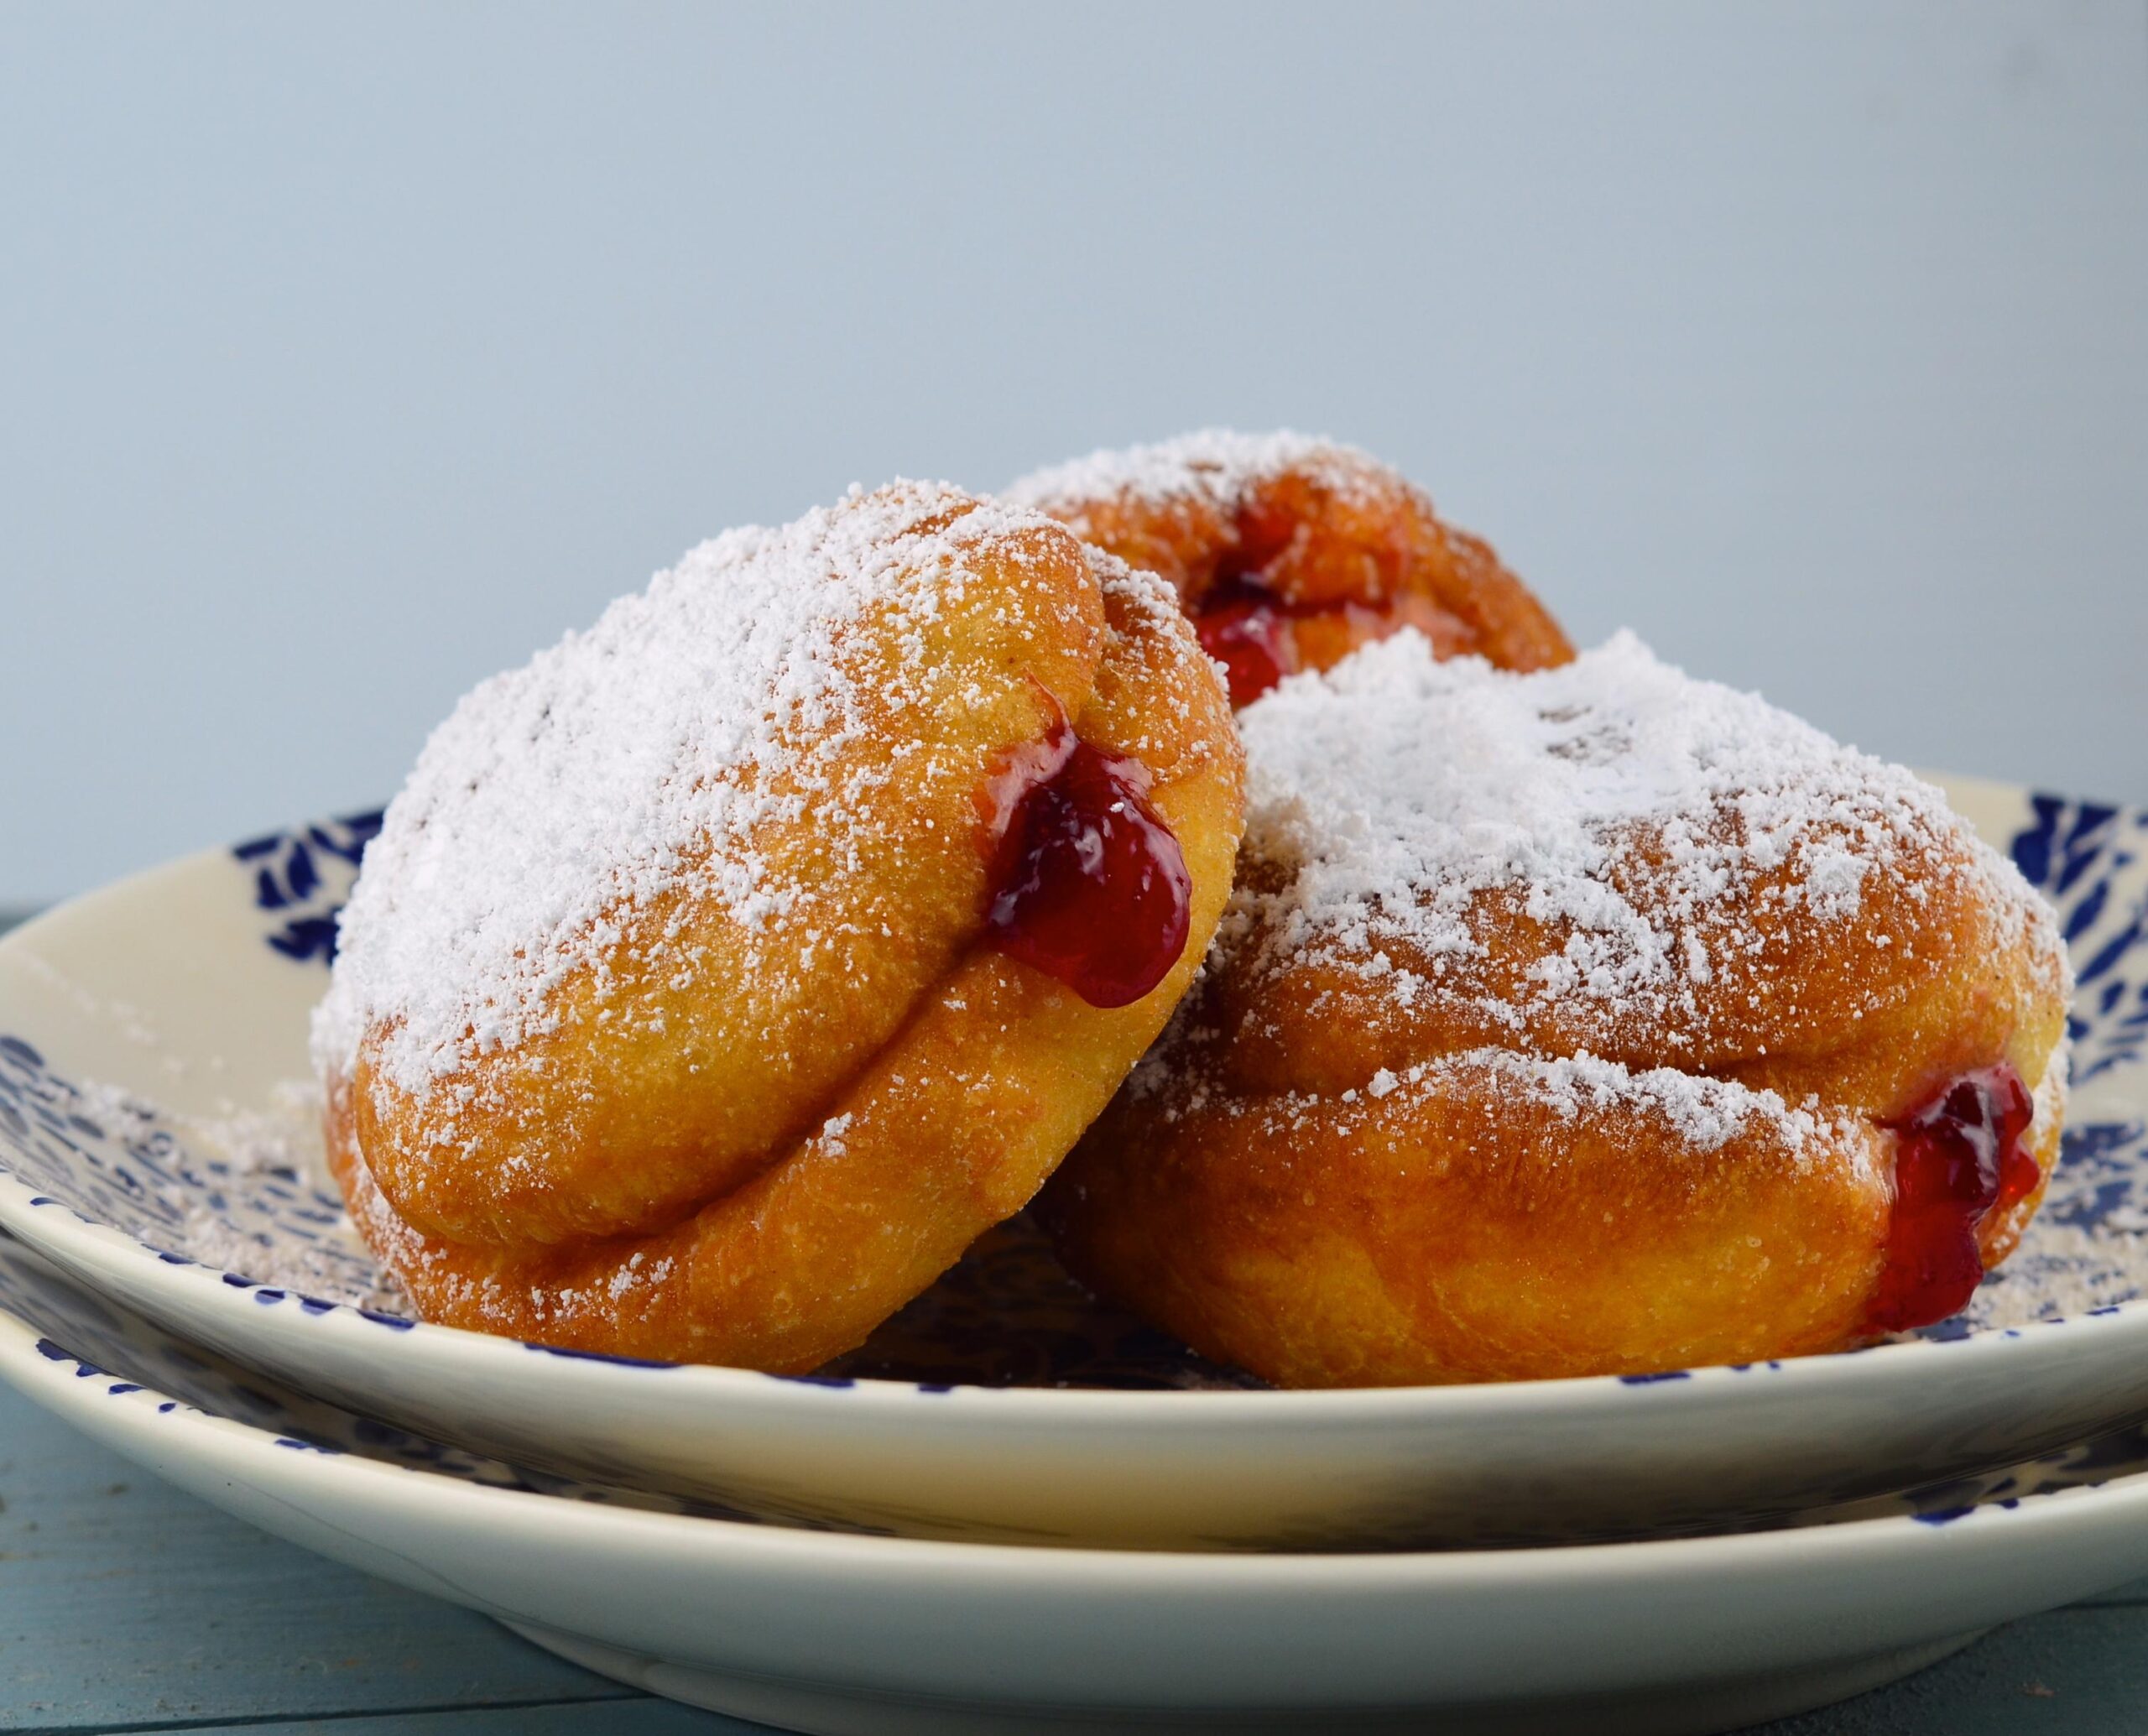  Deliciously festive and filled with gooey jelly, these sufganiyot are the ultimate indulgence.